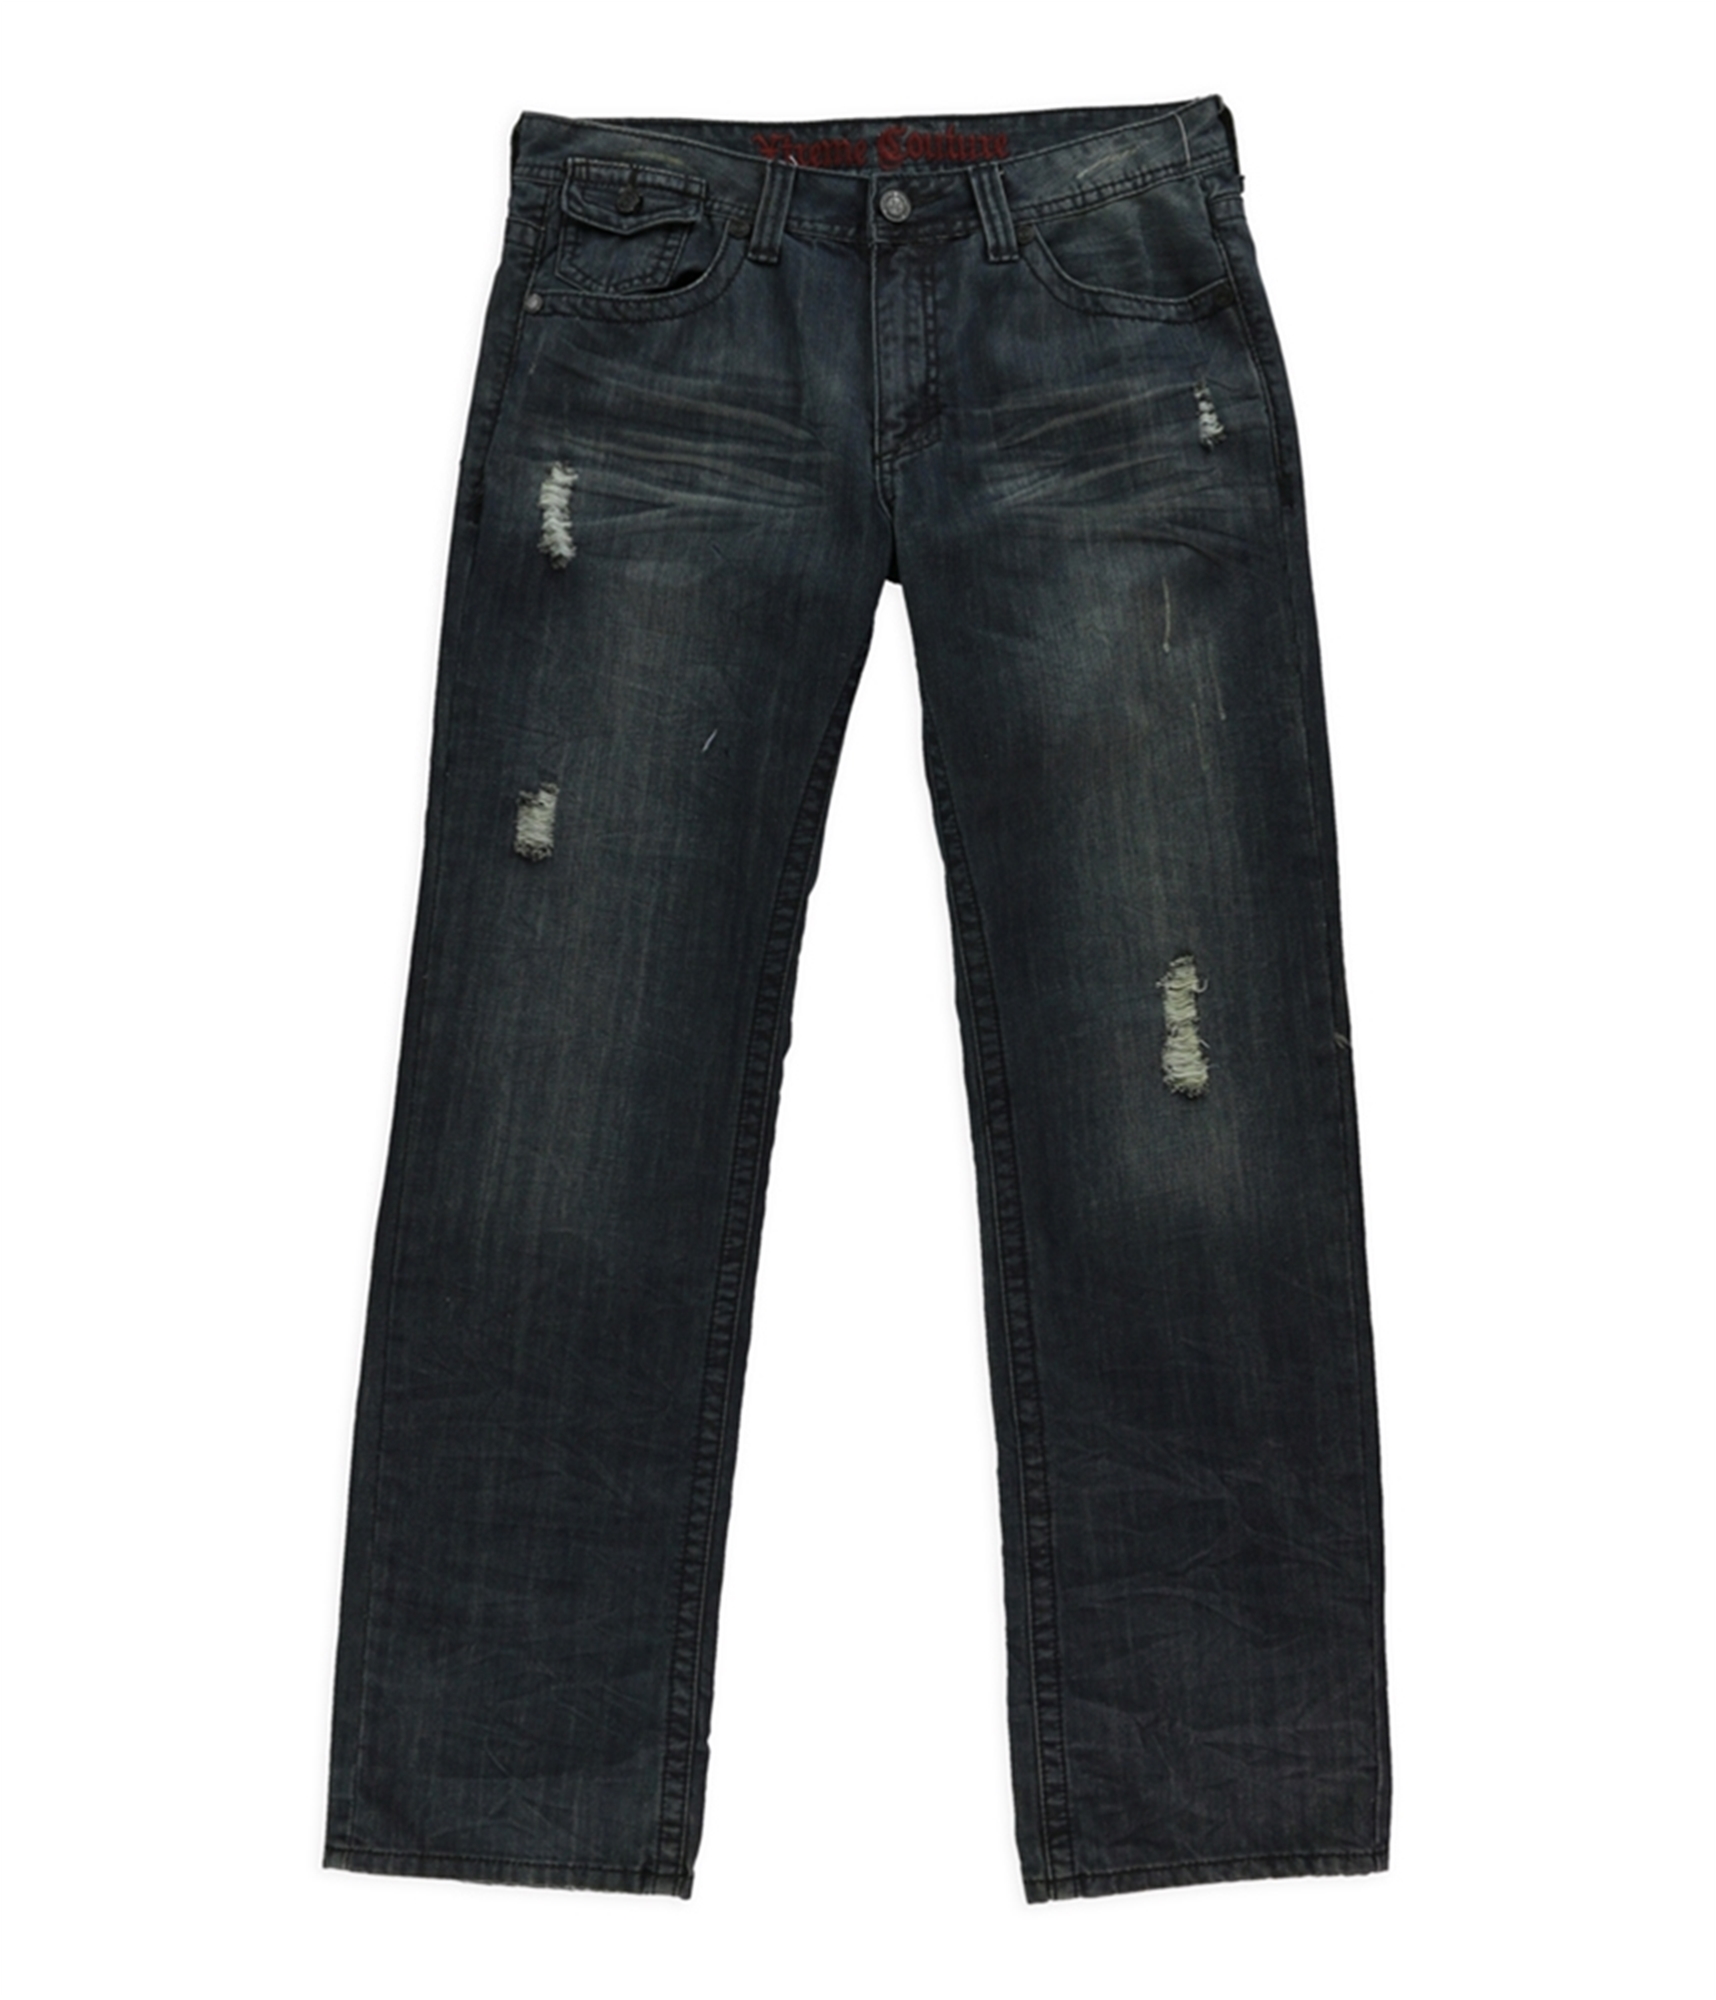 Buy a Mens Xtreme Couture Studded Cross Boot Cut Jeans Online ...